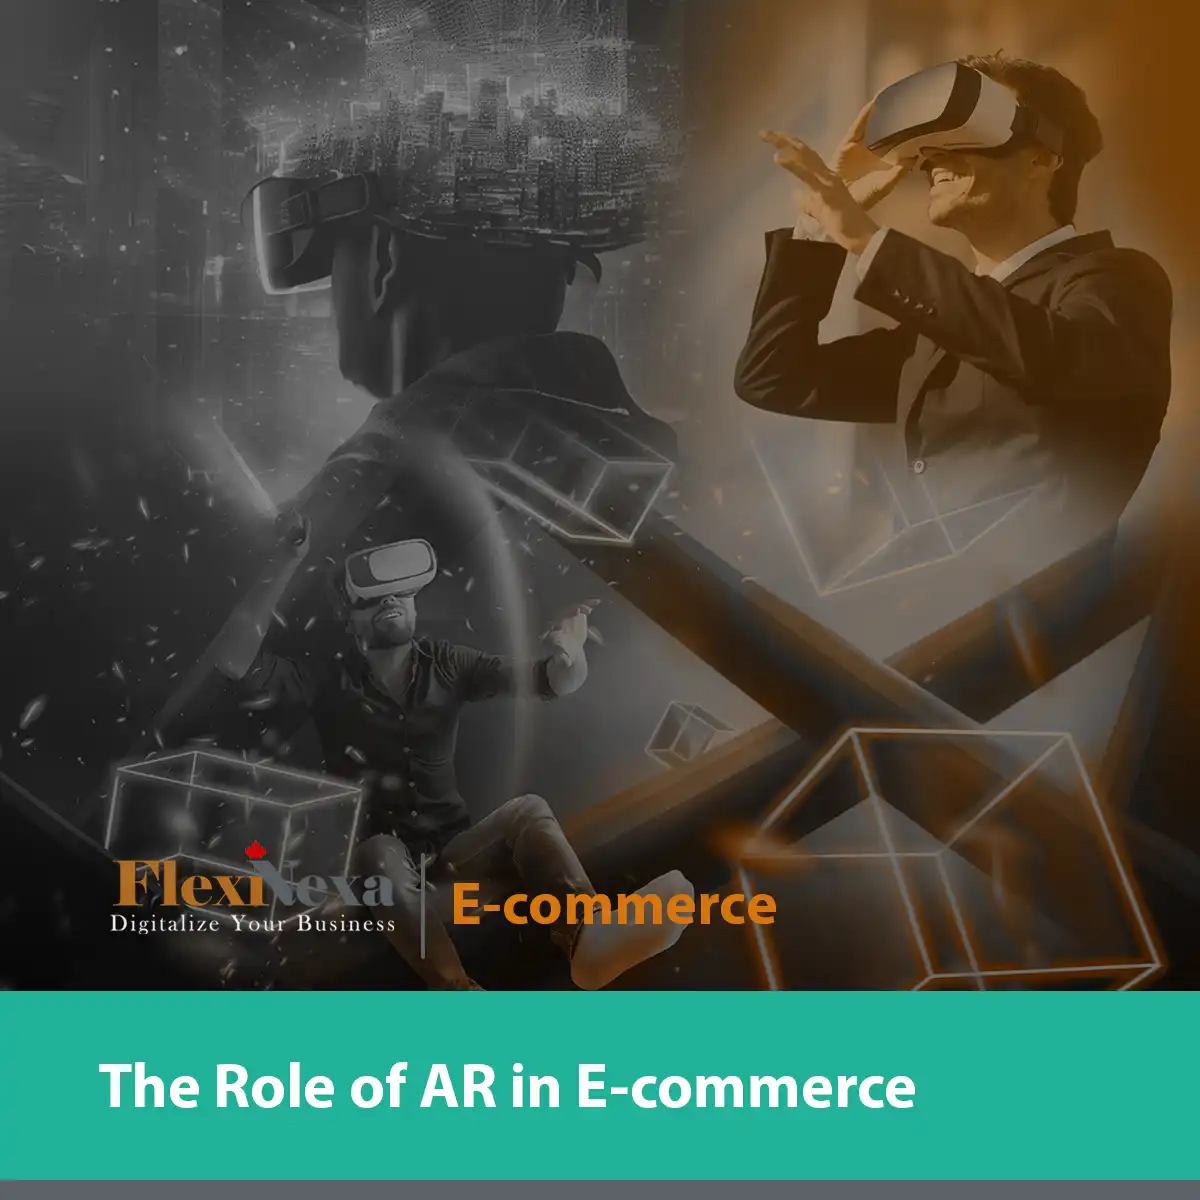 The Role of AR in E-commerce